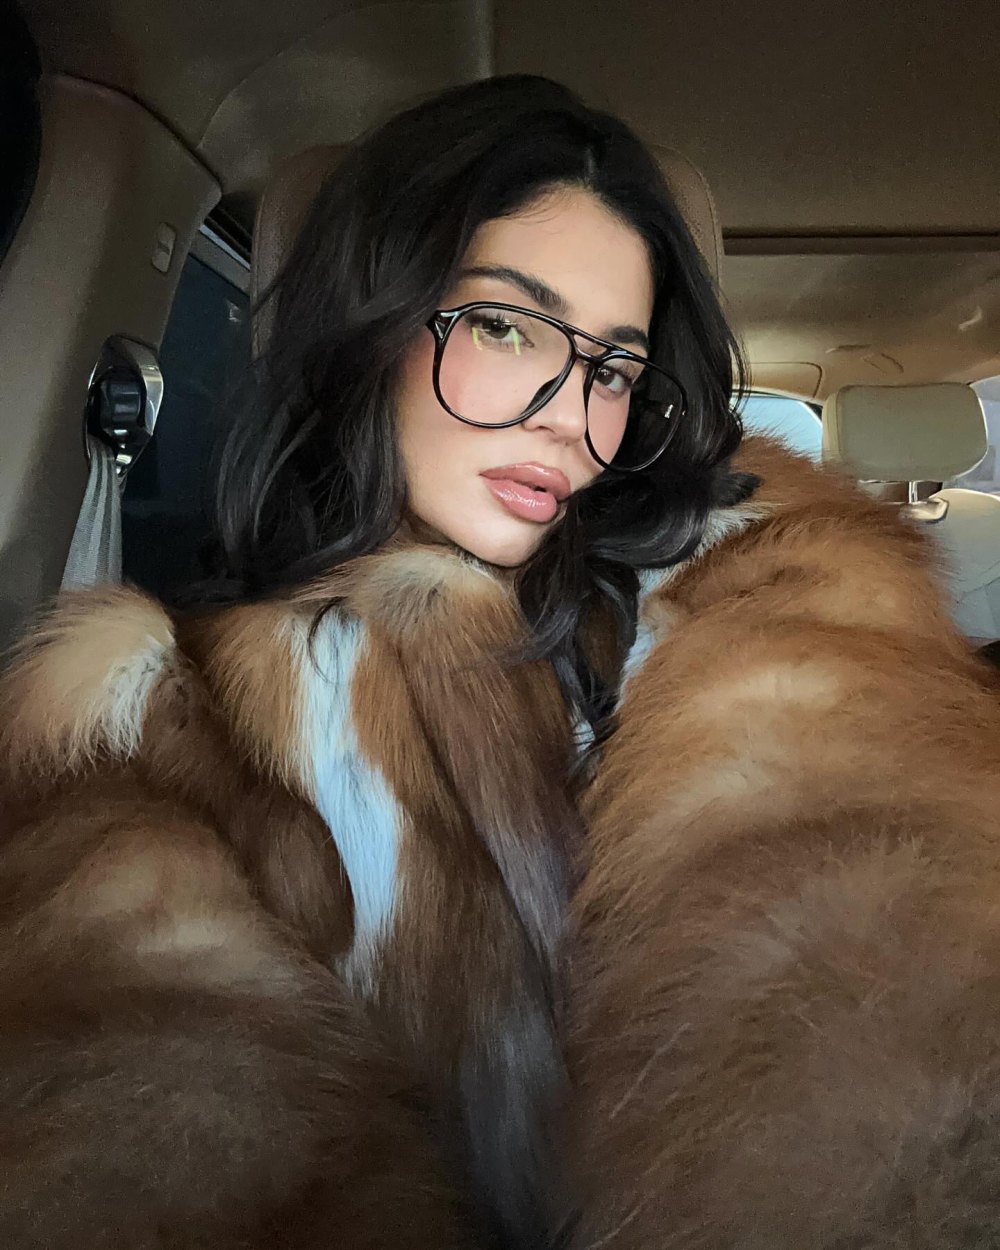 Kylie Jenner Reminds Us She’s the Queen of Fur Coats: ‘Happy Vday’